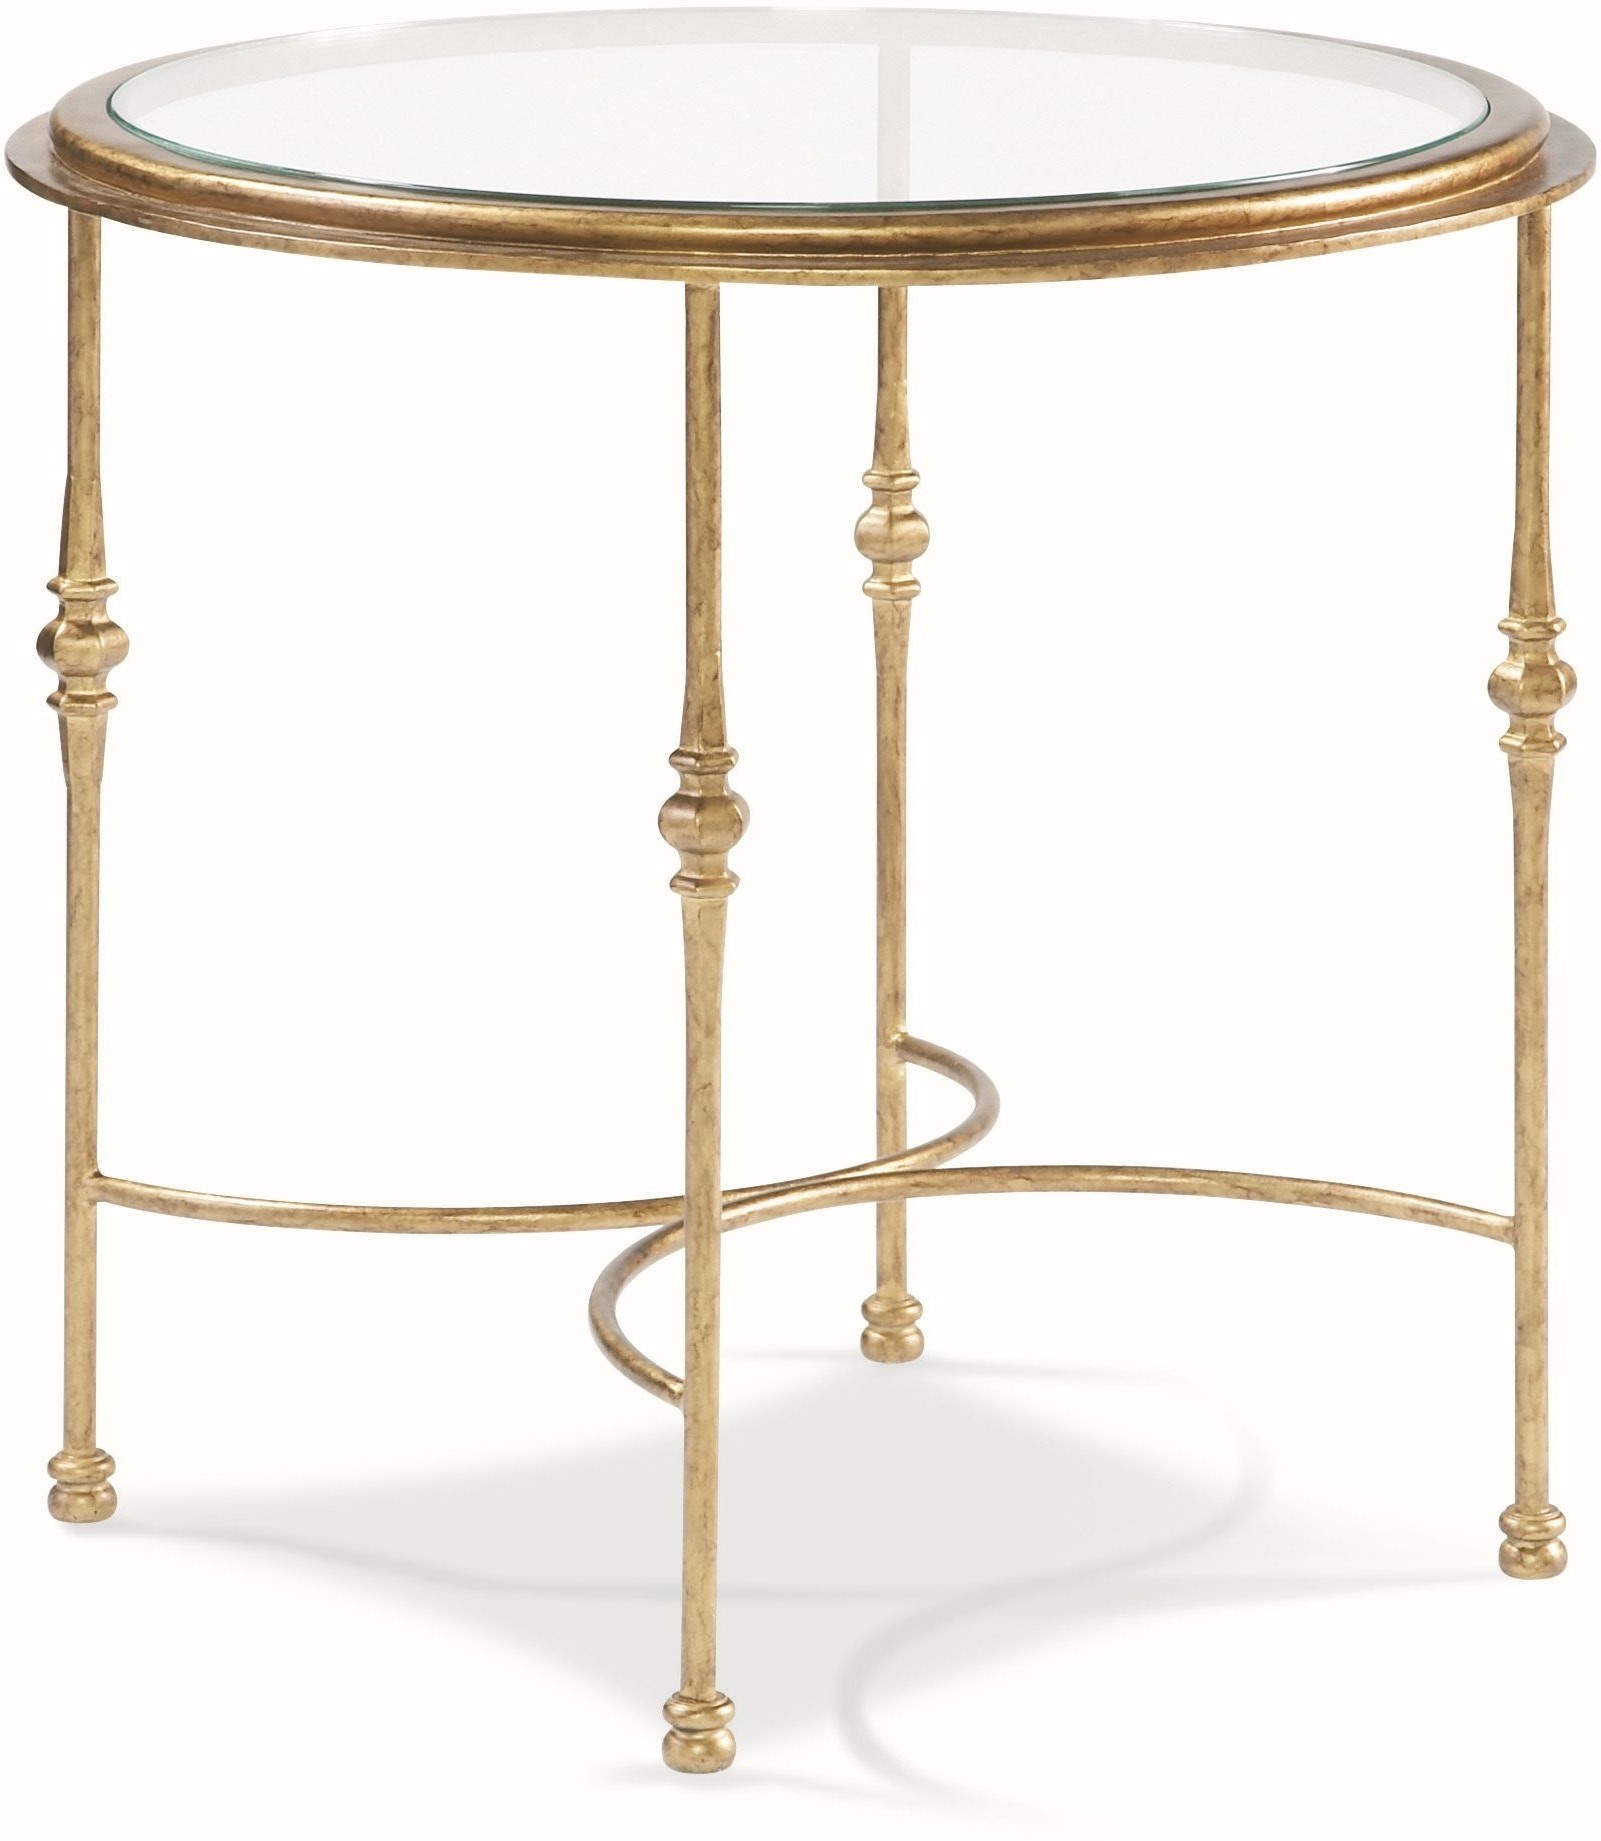 Louis j solomon metal end table with glass top